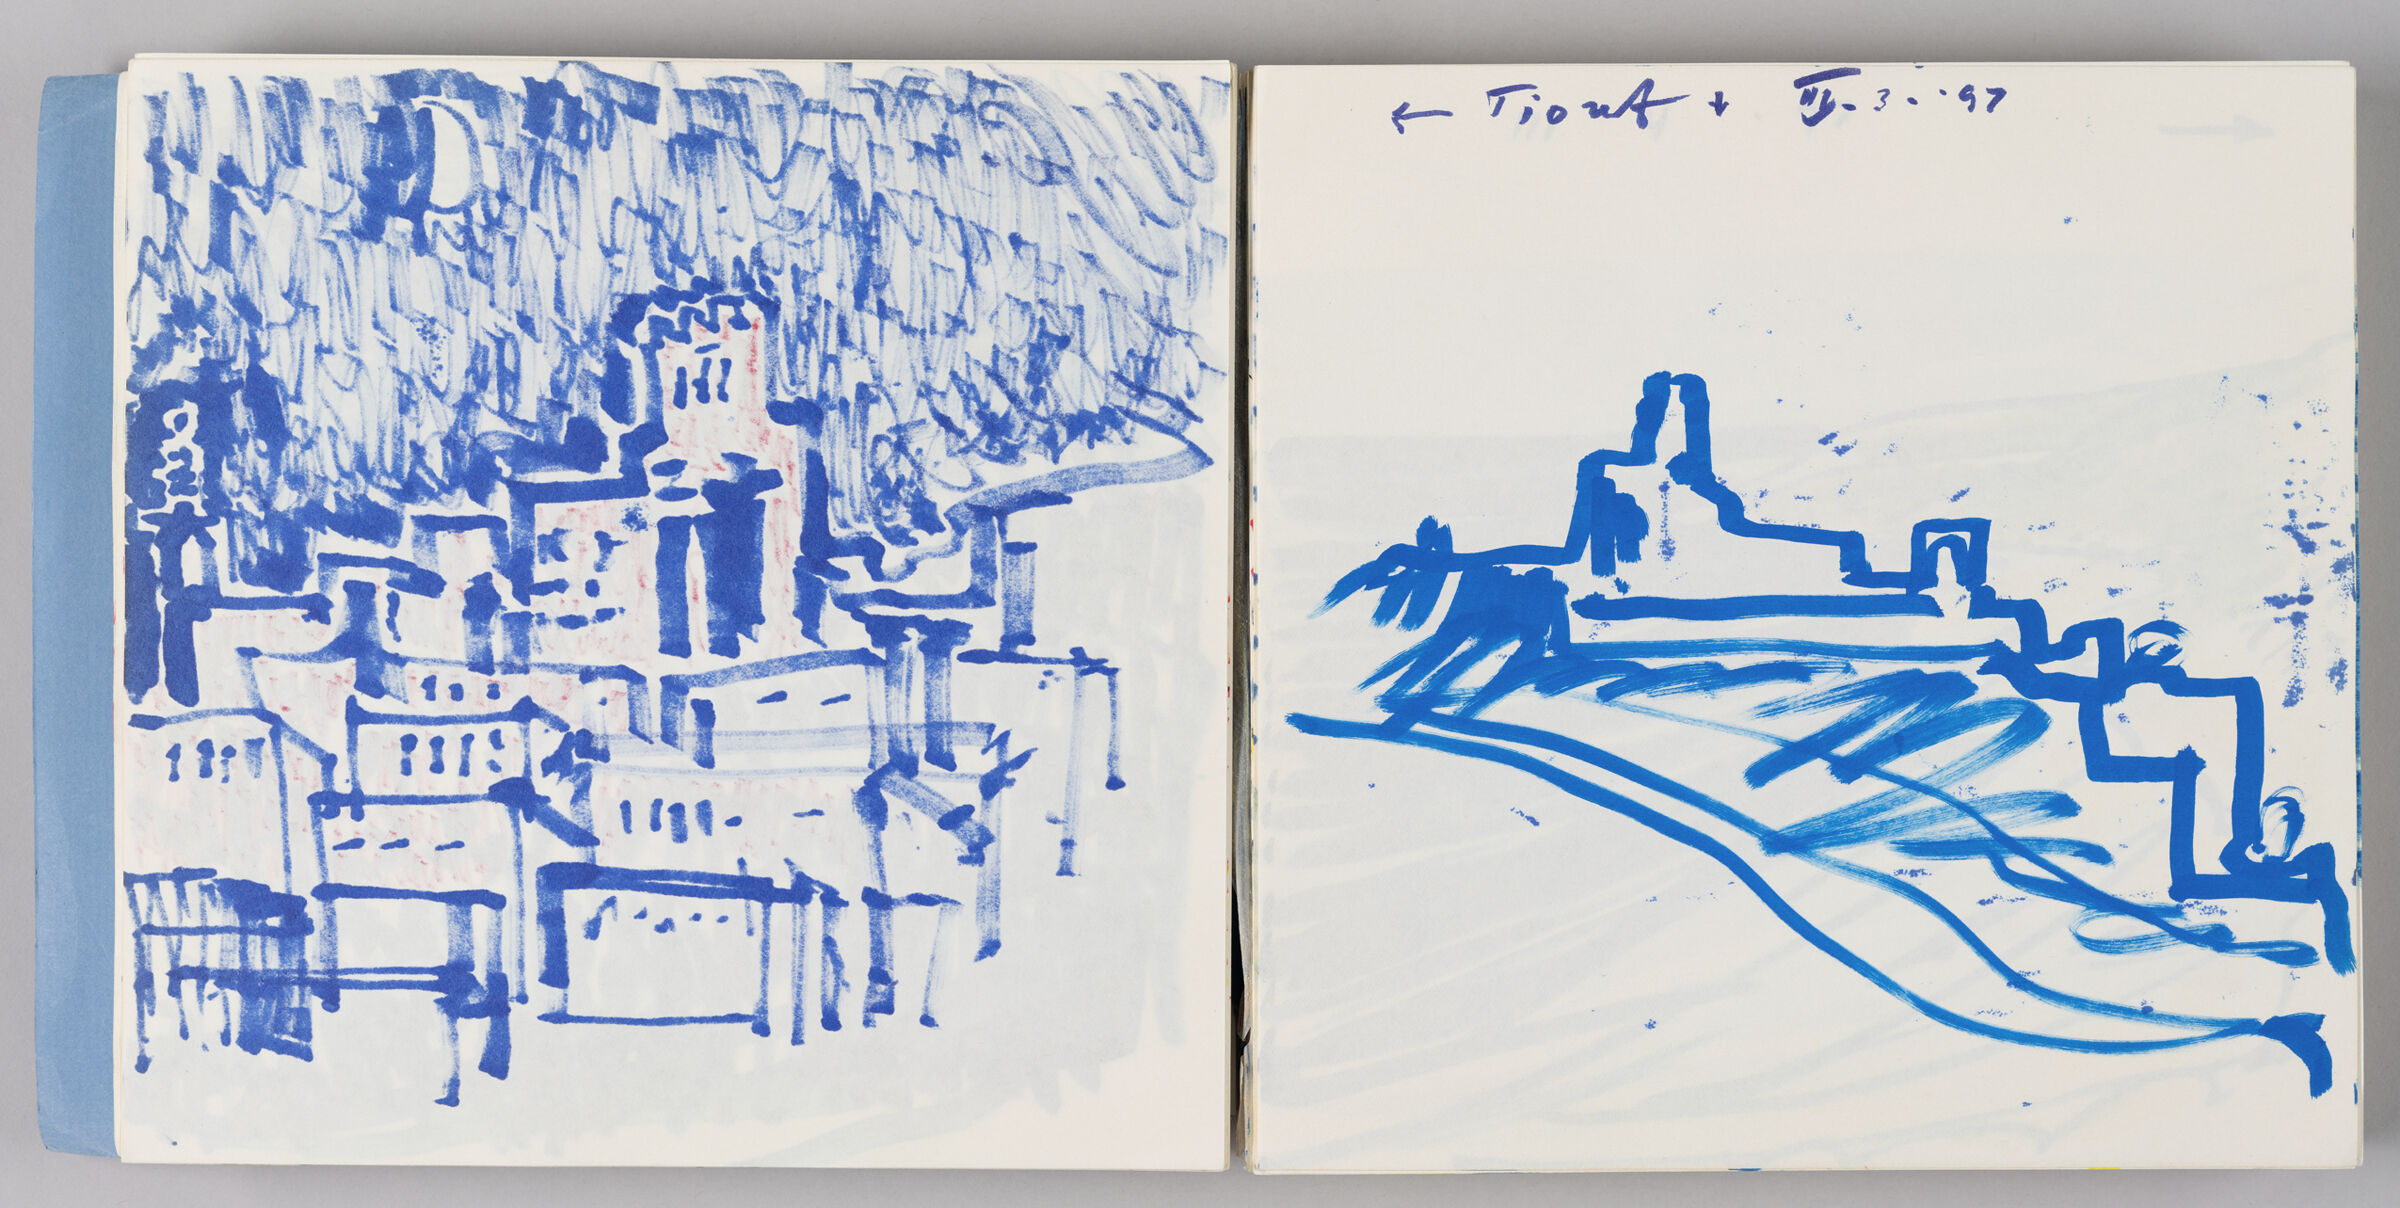 Untitled (Bleed-Through Of Previous Page, Left Page); Untitled (Note And View Of Tiout, Right Page)
